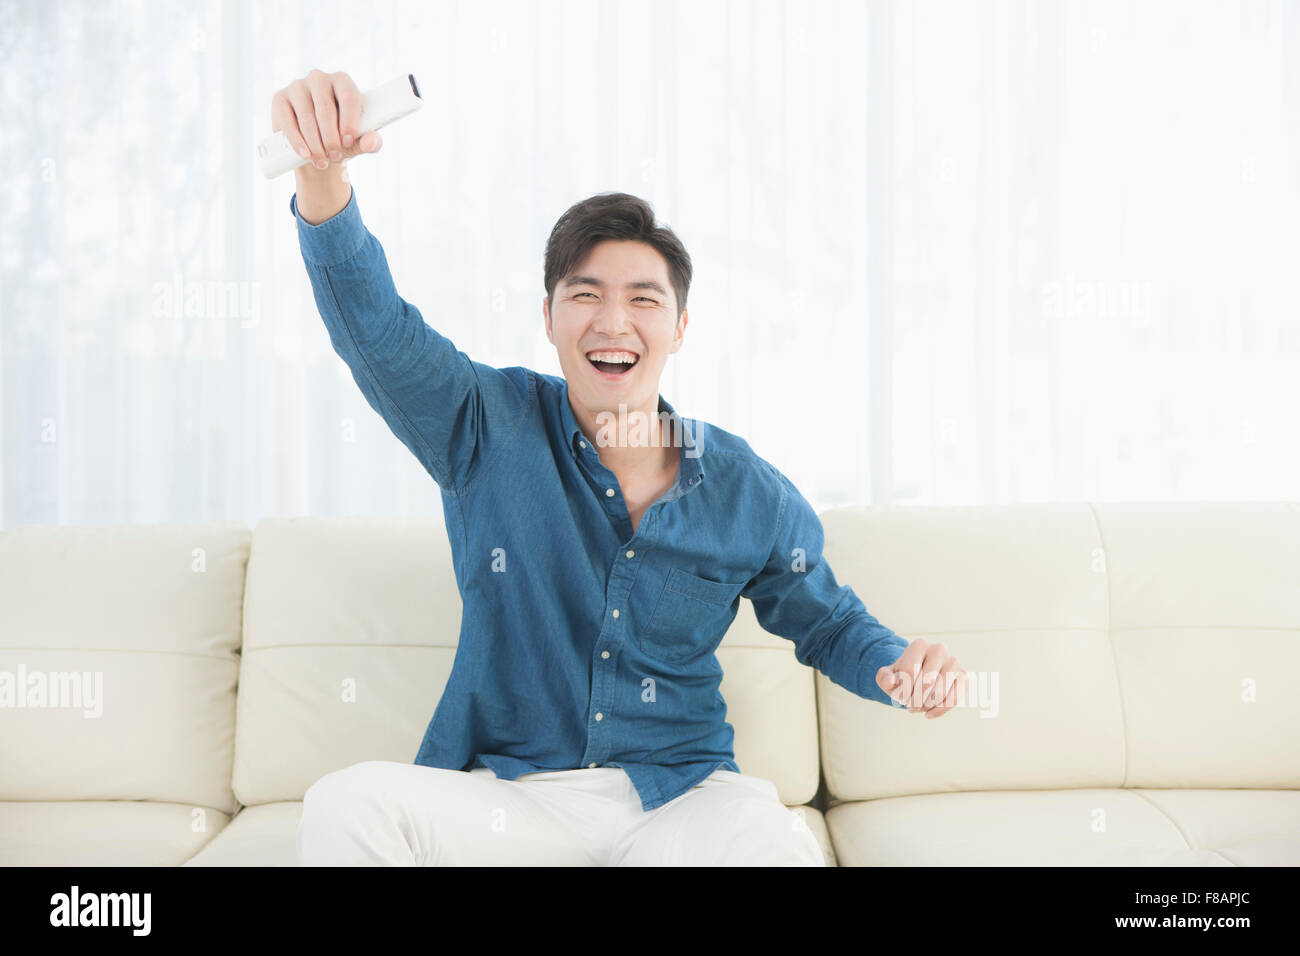 Smiling excited young man cheering holding hand with remote control sitting on sofa Stock Photo